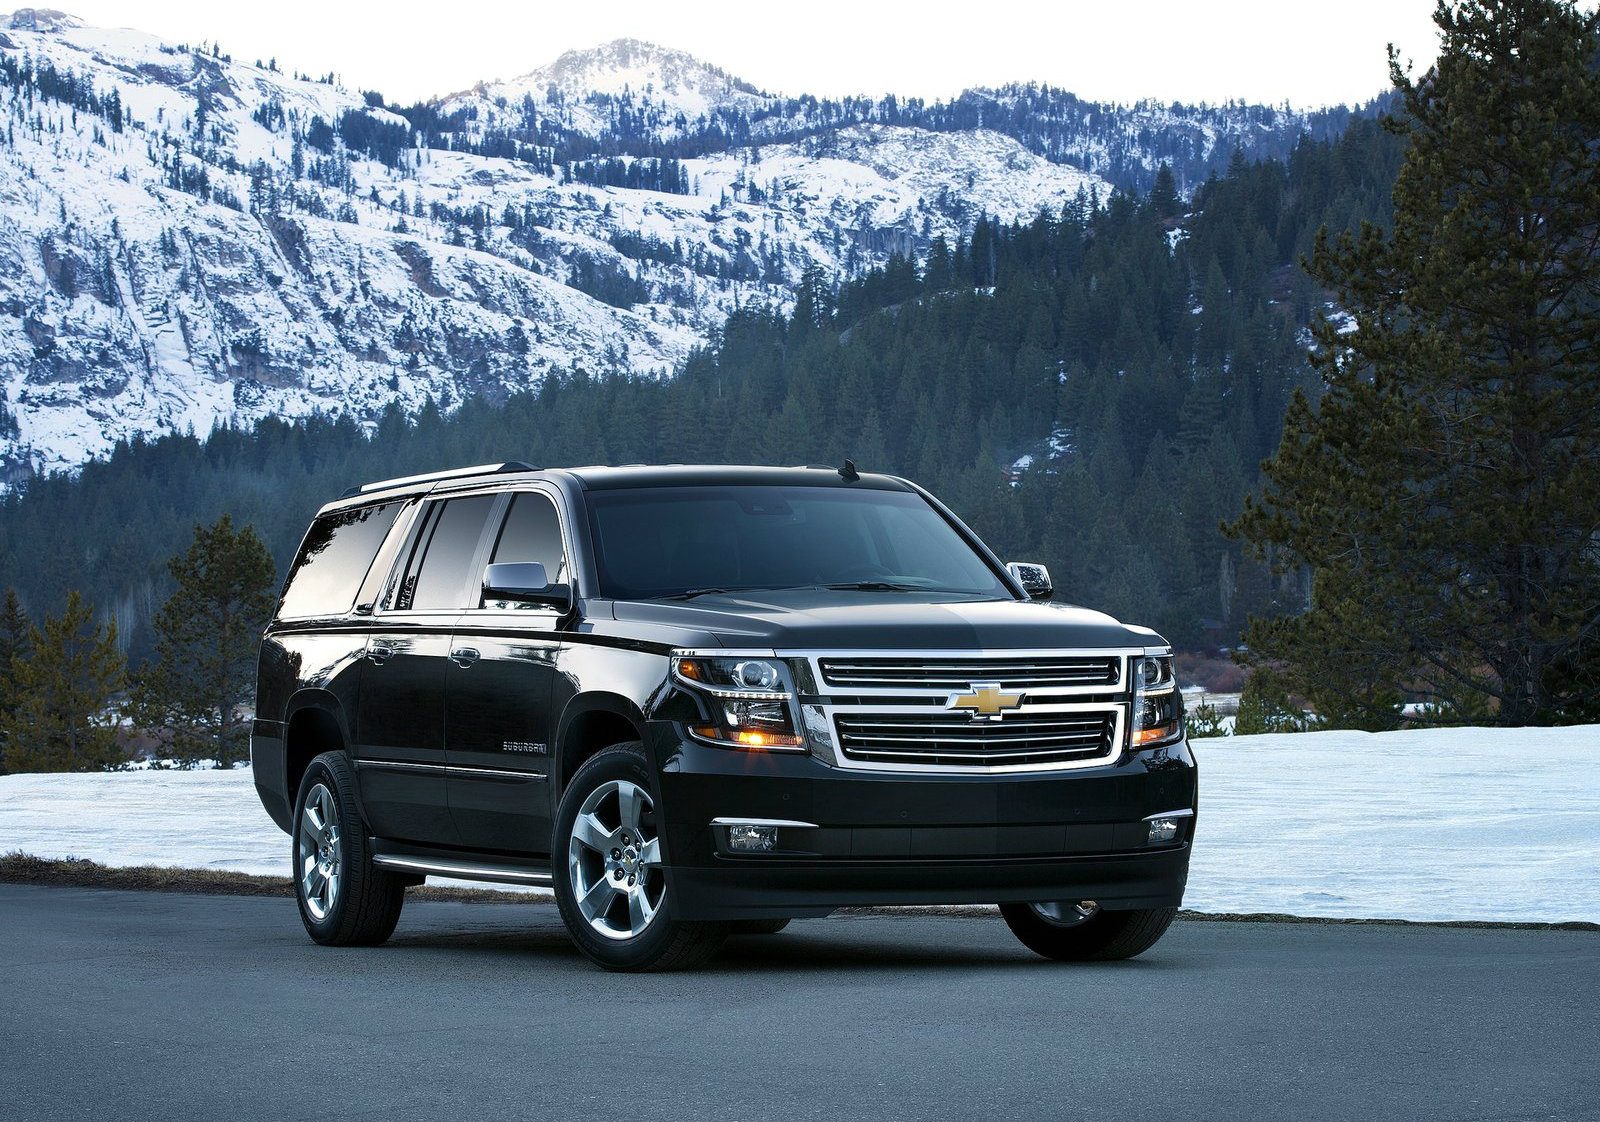 gm-full-size-suvs-updated-for-the-2015i-model-year-photo-gallery_1